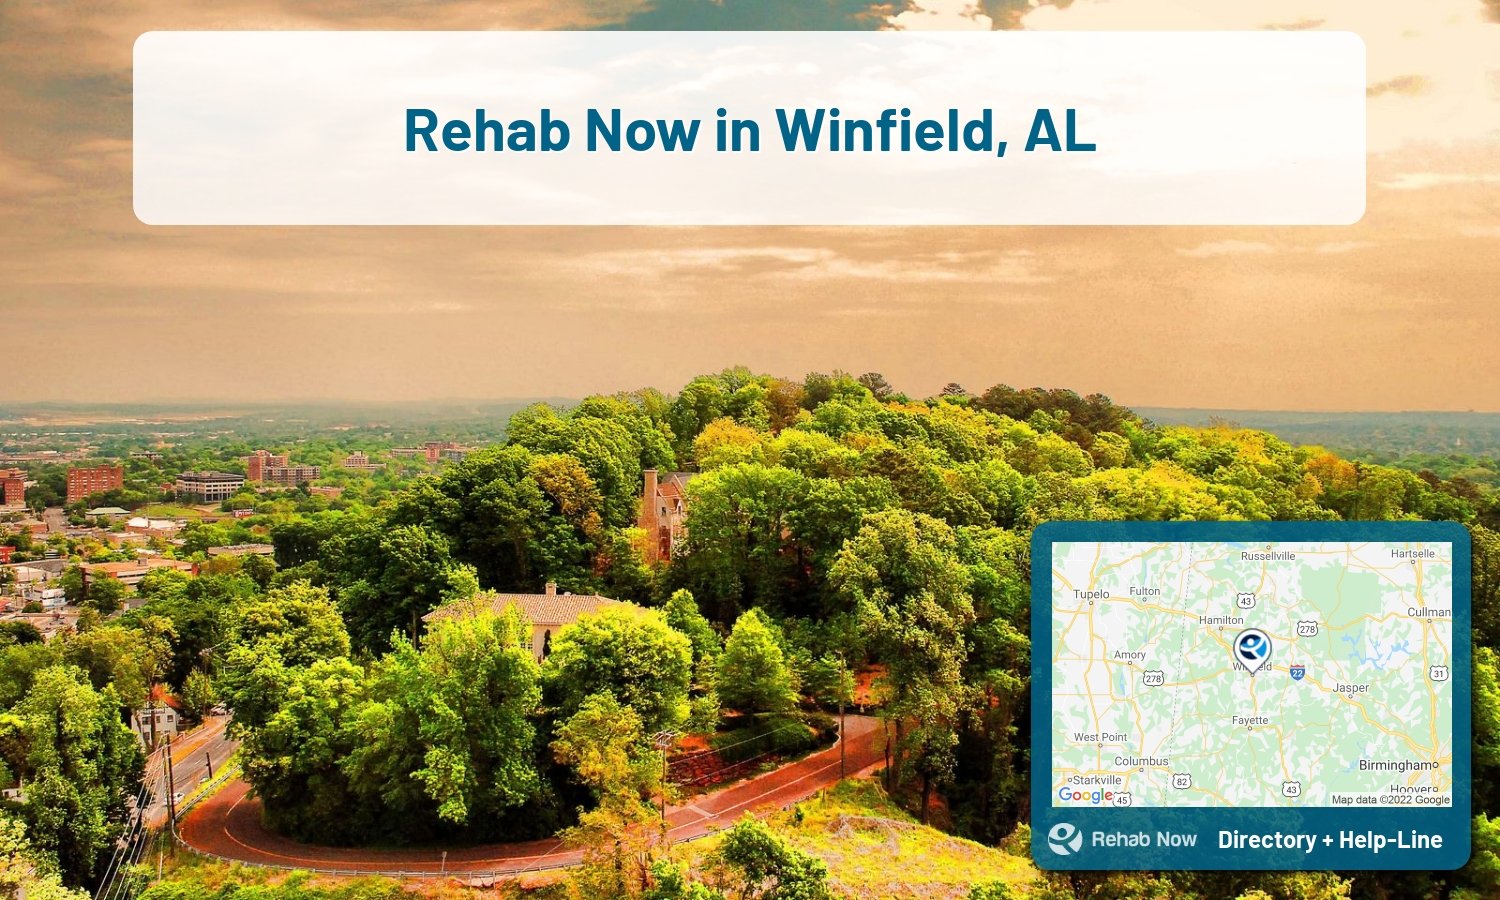 Winfield, AL Treatment Centers. Find drug rehab in Winfield, Alabama, or detox and treatment programs. Get the right help now!